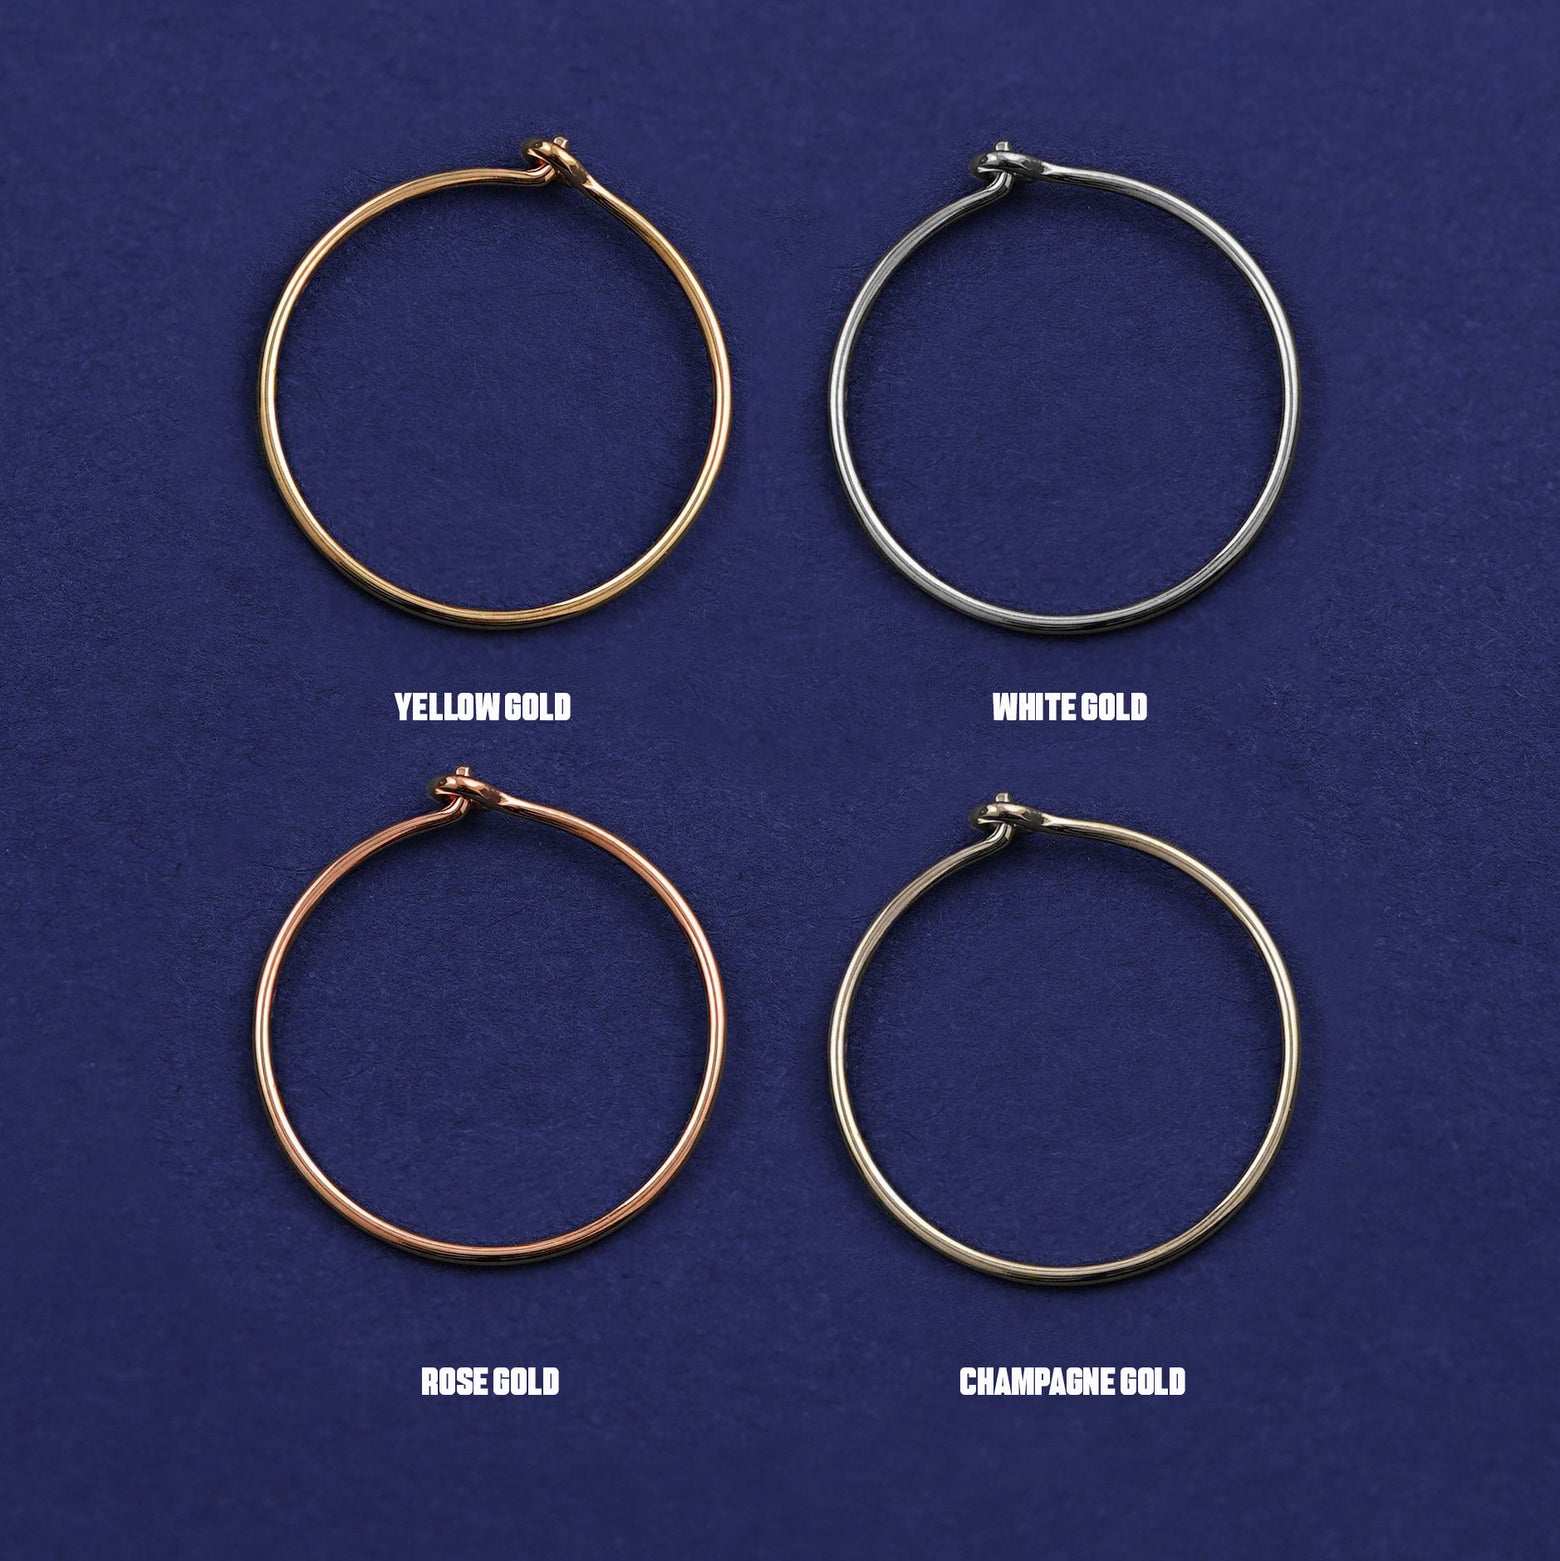 Four versions of the Medium Hoop shown in options of yellow, white, rose and champagne gold